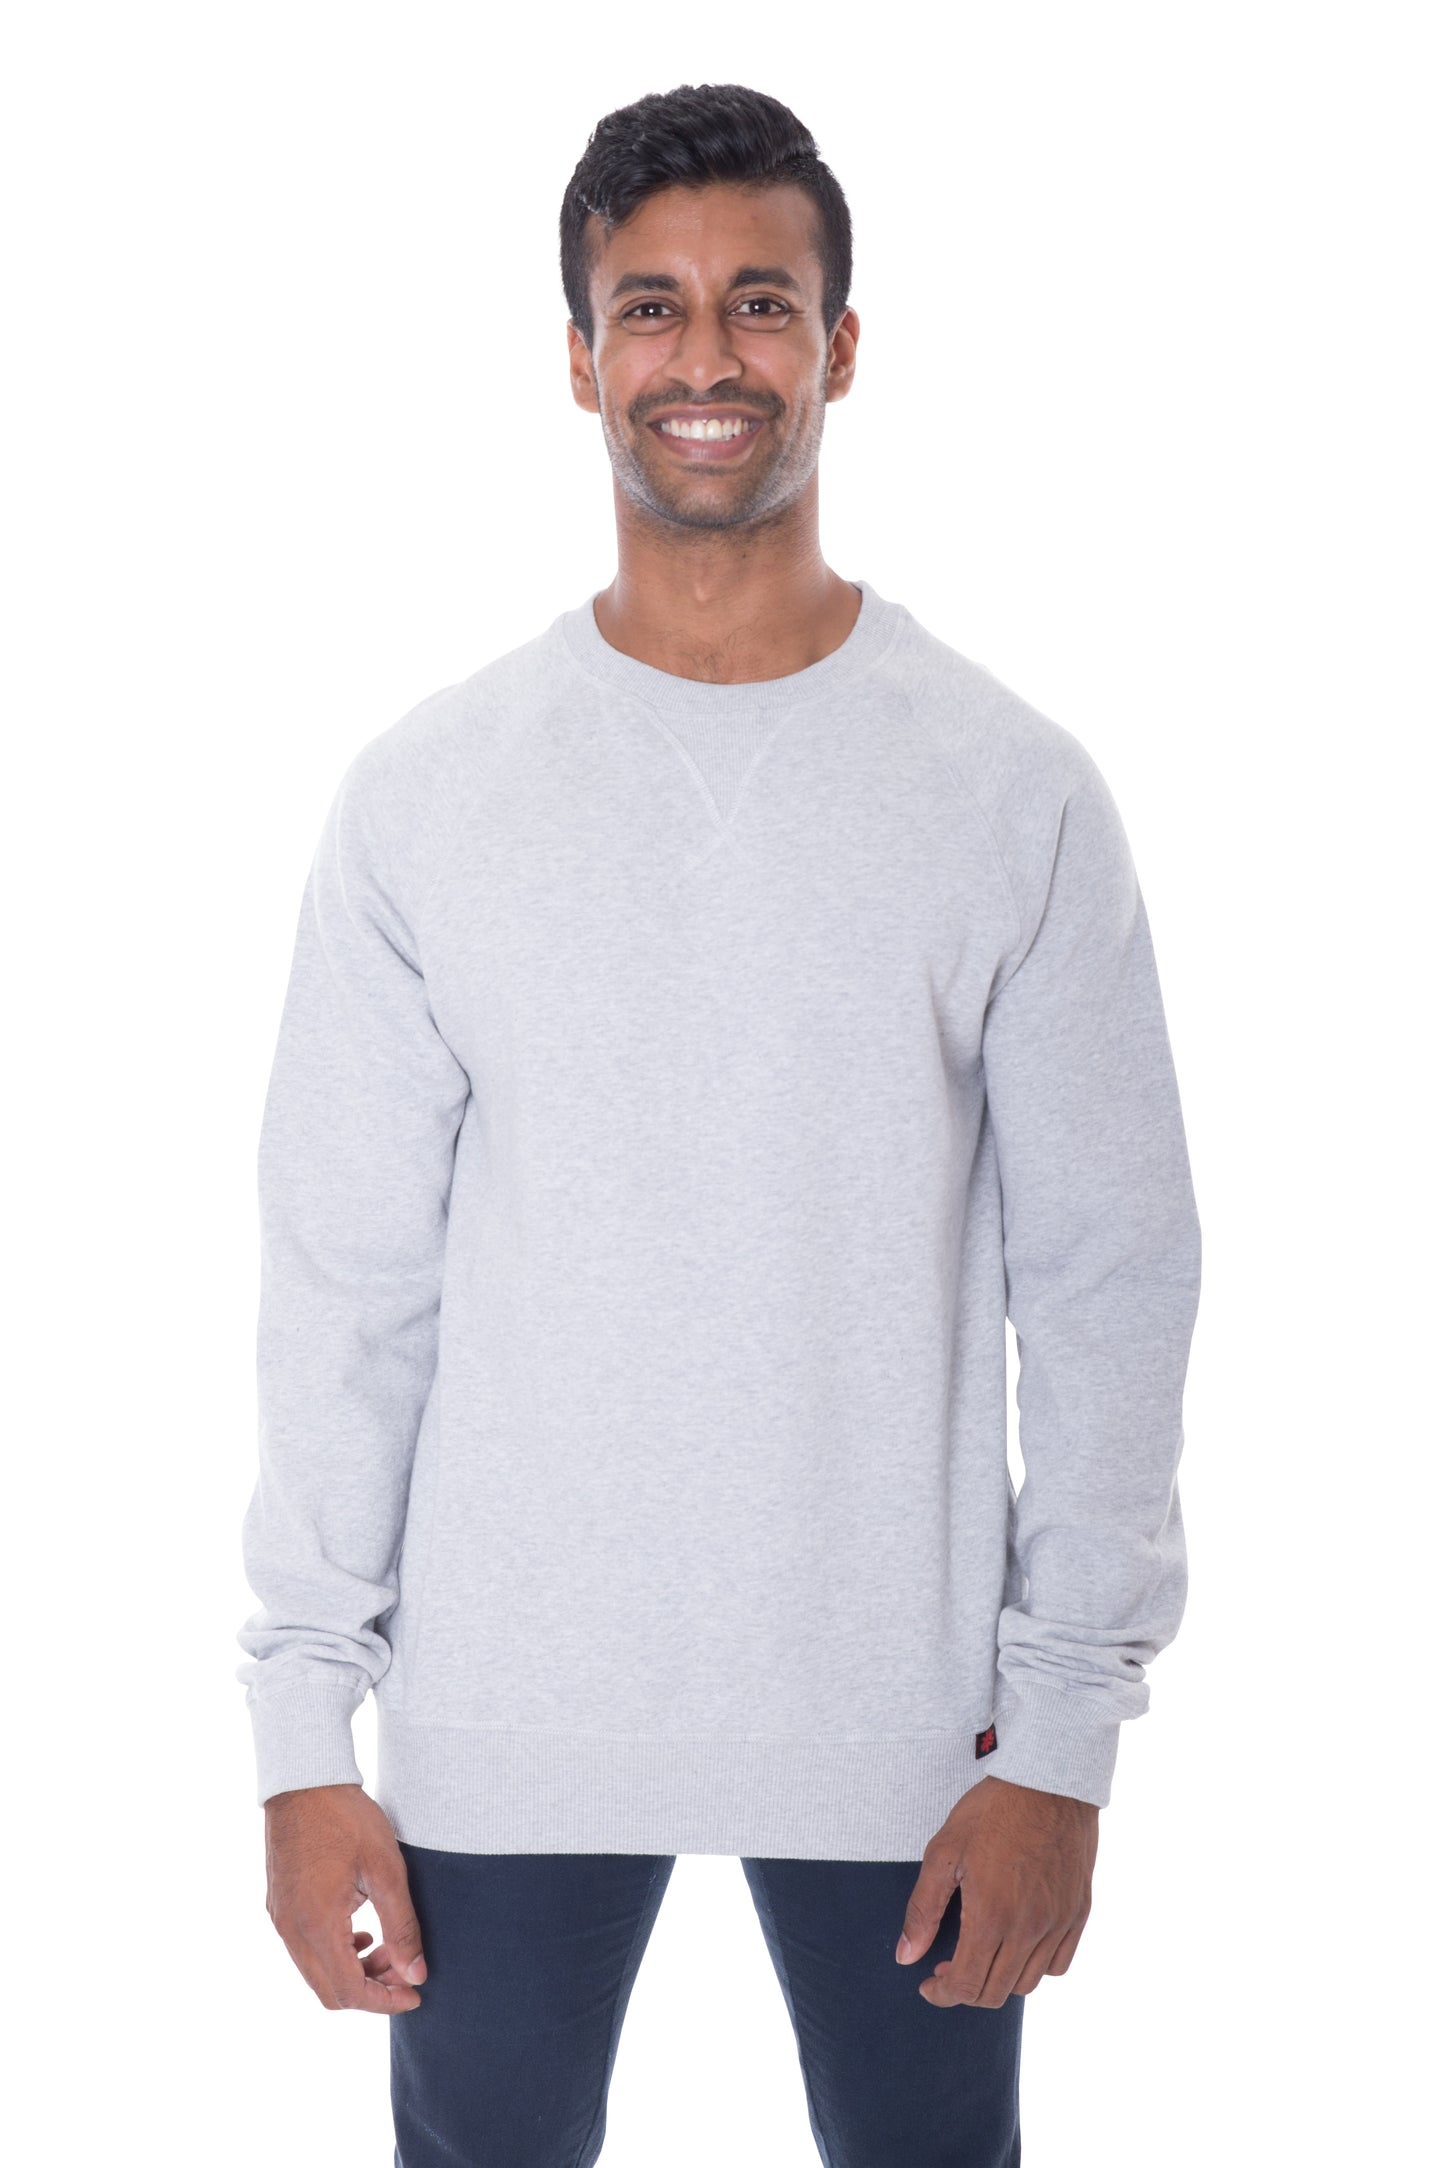 Etiko grey organic cotton crew neck top with long sleeves, ethically made, certified organic